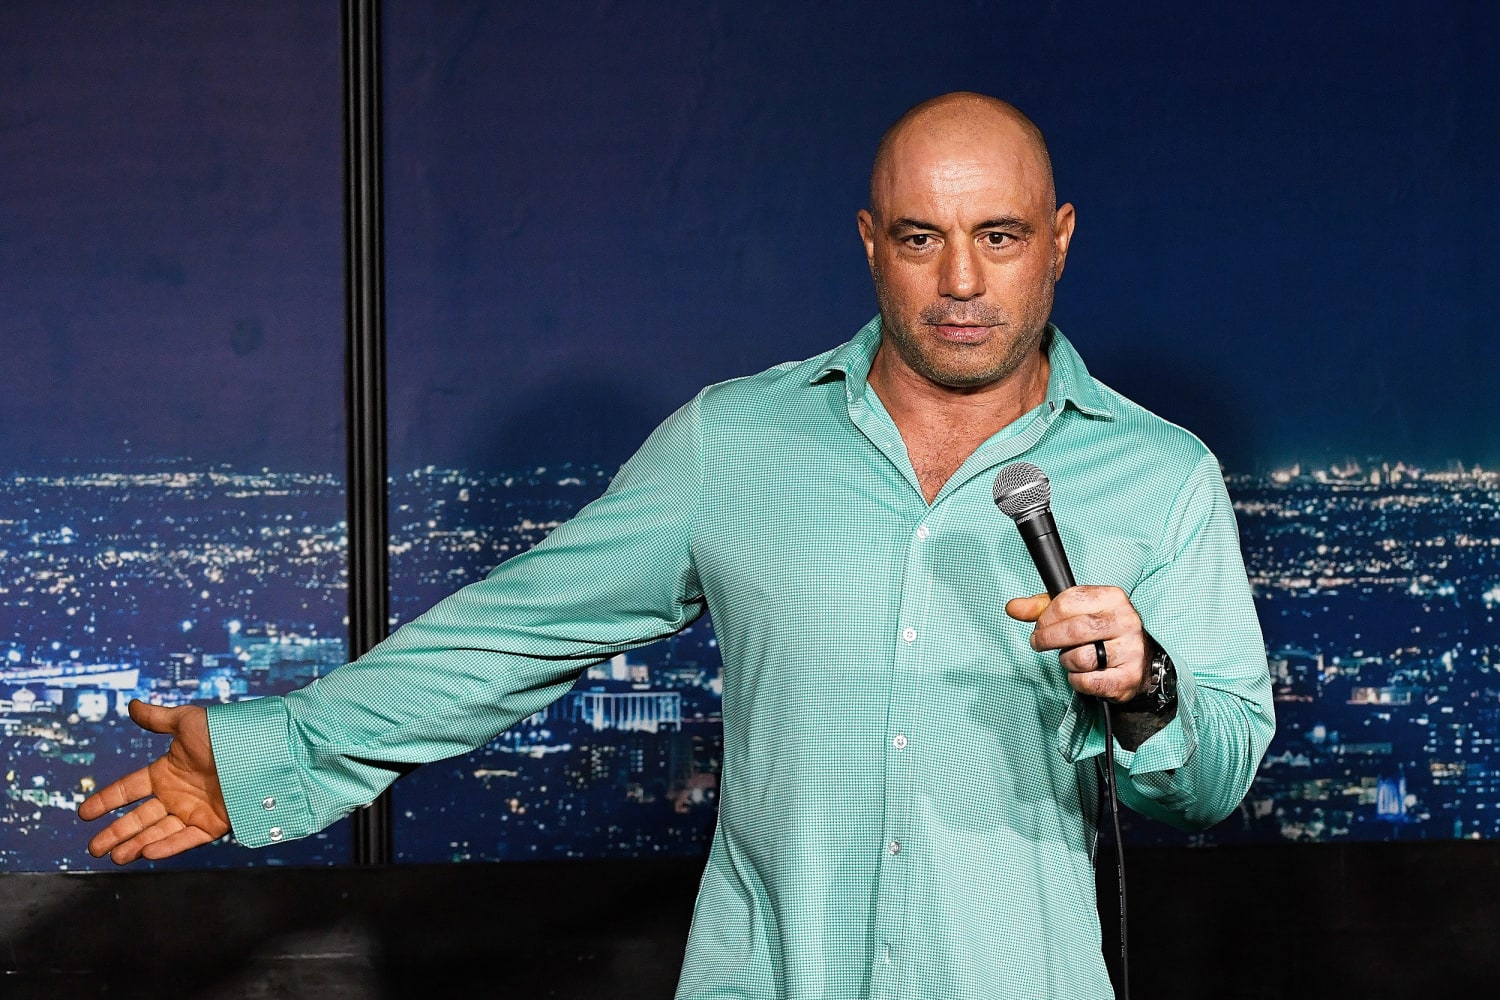 Joe Rogan criticized, mocked after saying straight white men are silenced  by 'woke' culture